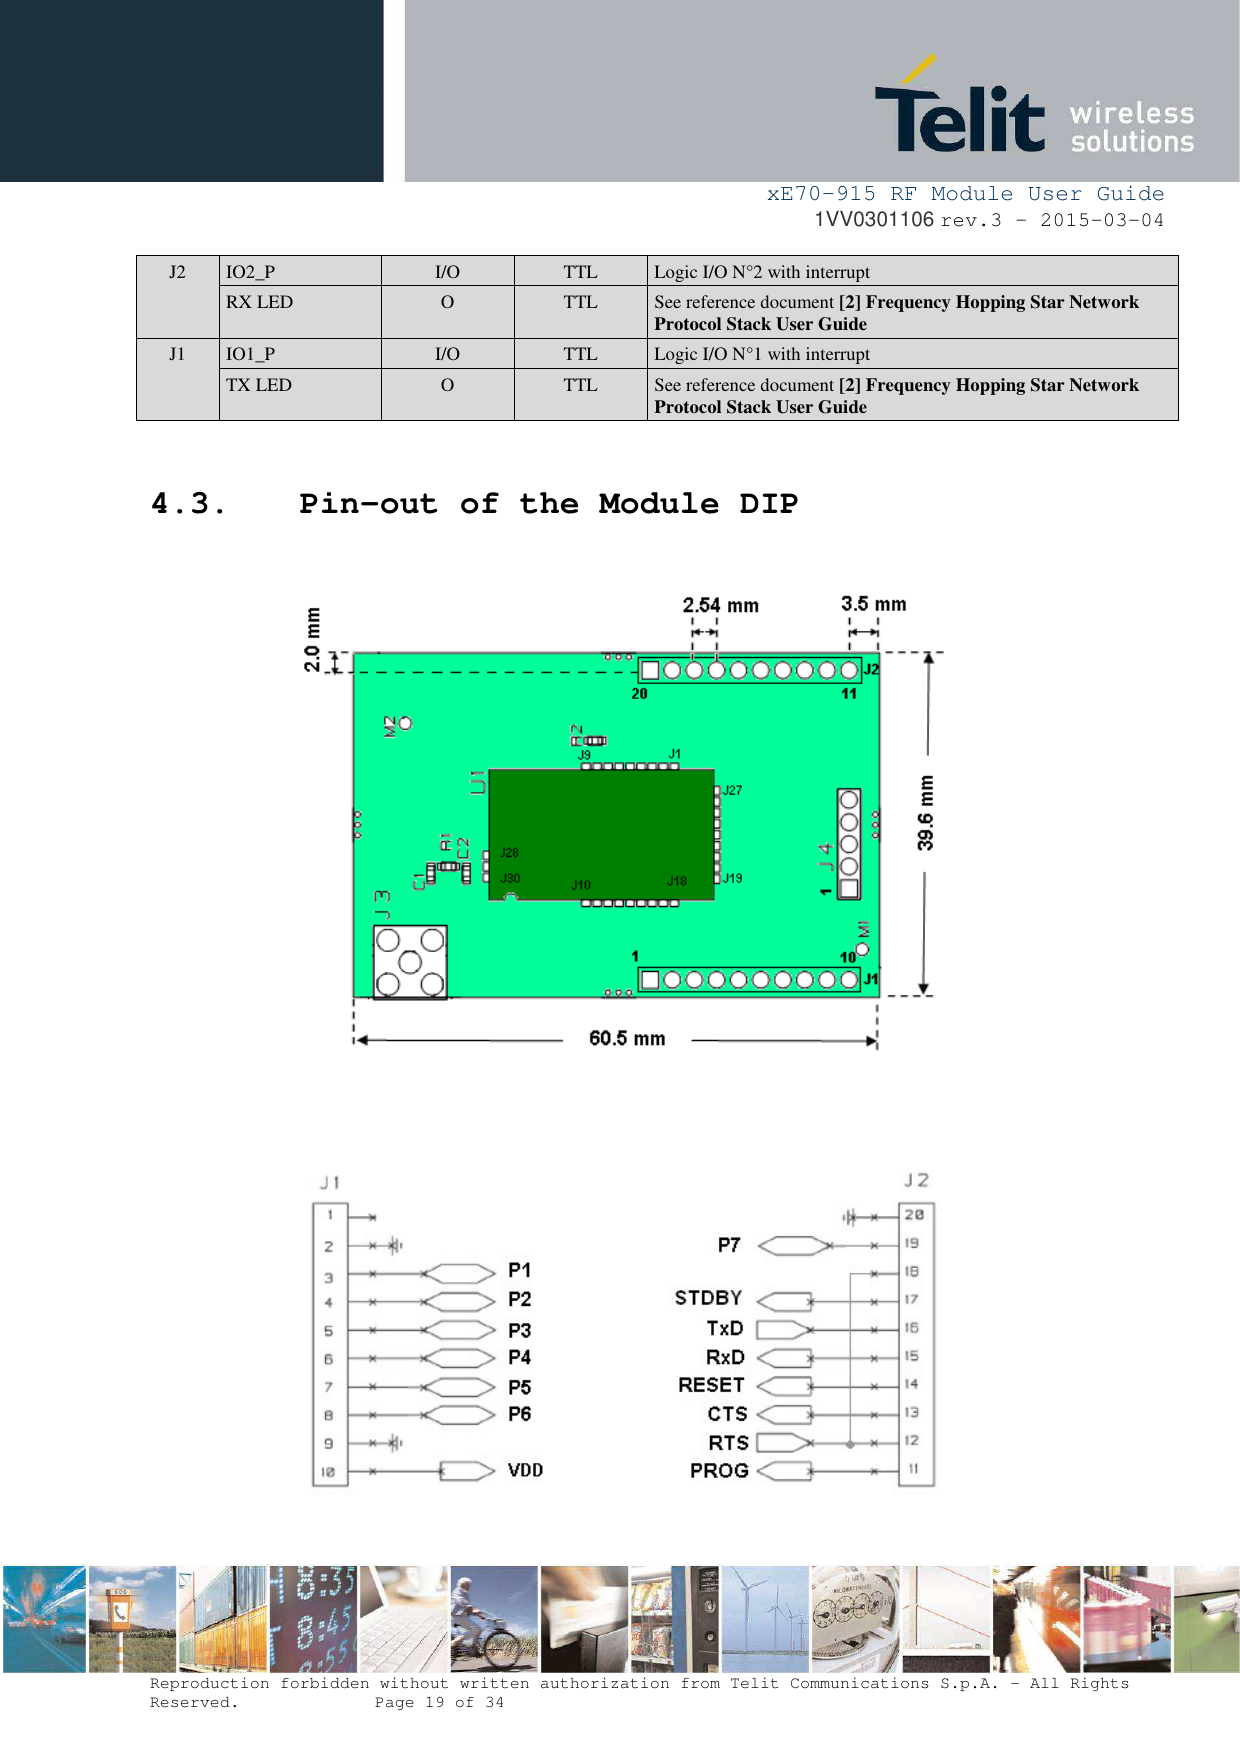     xE70-915 RF Module User Guide 1VV0301106 rev.3 – 2015-03-04  Reproduction forbidden without written authorization from Telit Communications S.p.A. - All Rights Reserved.    Page 19 of 34  J2  IO2_P  I/O  TTL  Logic I/O N°2 with interrupt RX LED  O  TTL  See reference document [2] Frequency Hopping Star Network Protocol Stack User Guide J1  IO1_P  I/O  TTL  Logic I/O N°1 with interrupt TX LED  O  TTL  See reference document [2] Frequency Hopping Star Network Protocol Stack User Guide  4.3. Pin-out of the Module DIP                 